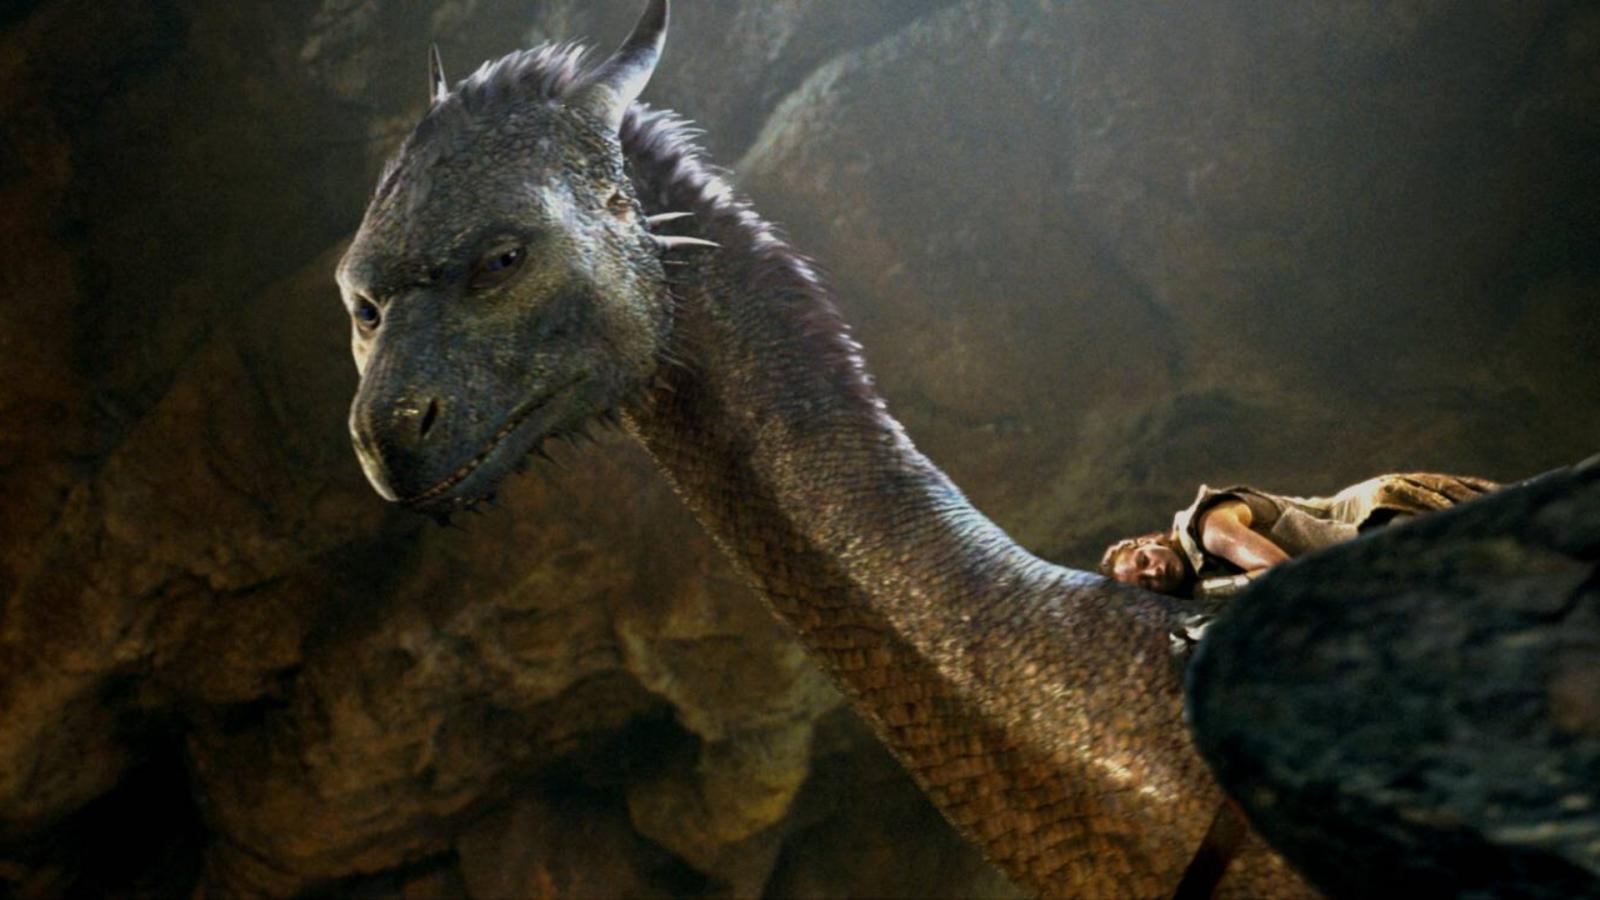 15 Fantasy Films that Aren't Harry Potter (But May Be Better) - image 9